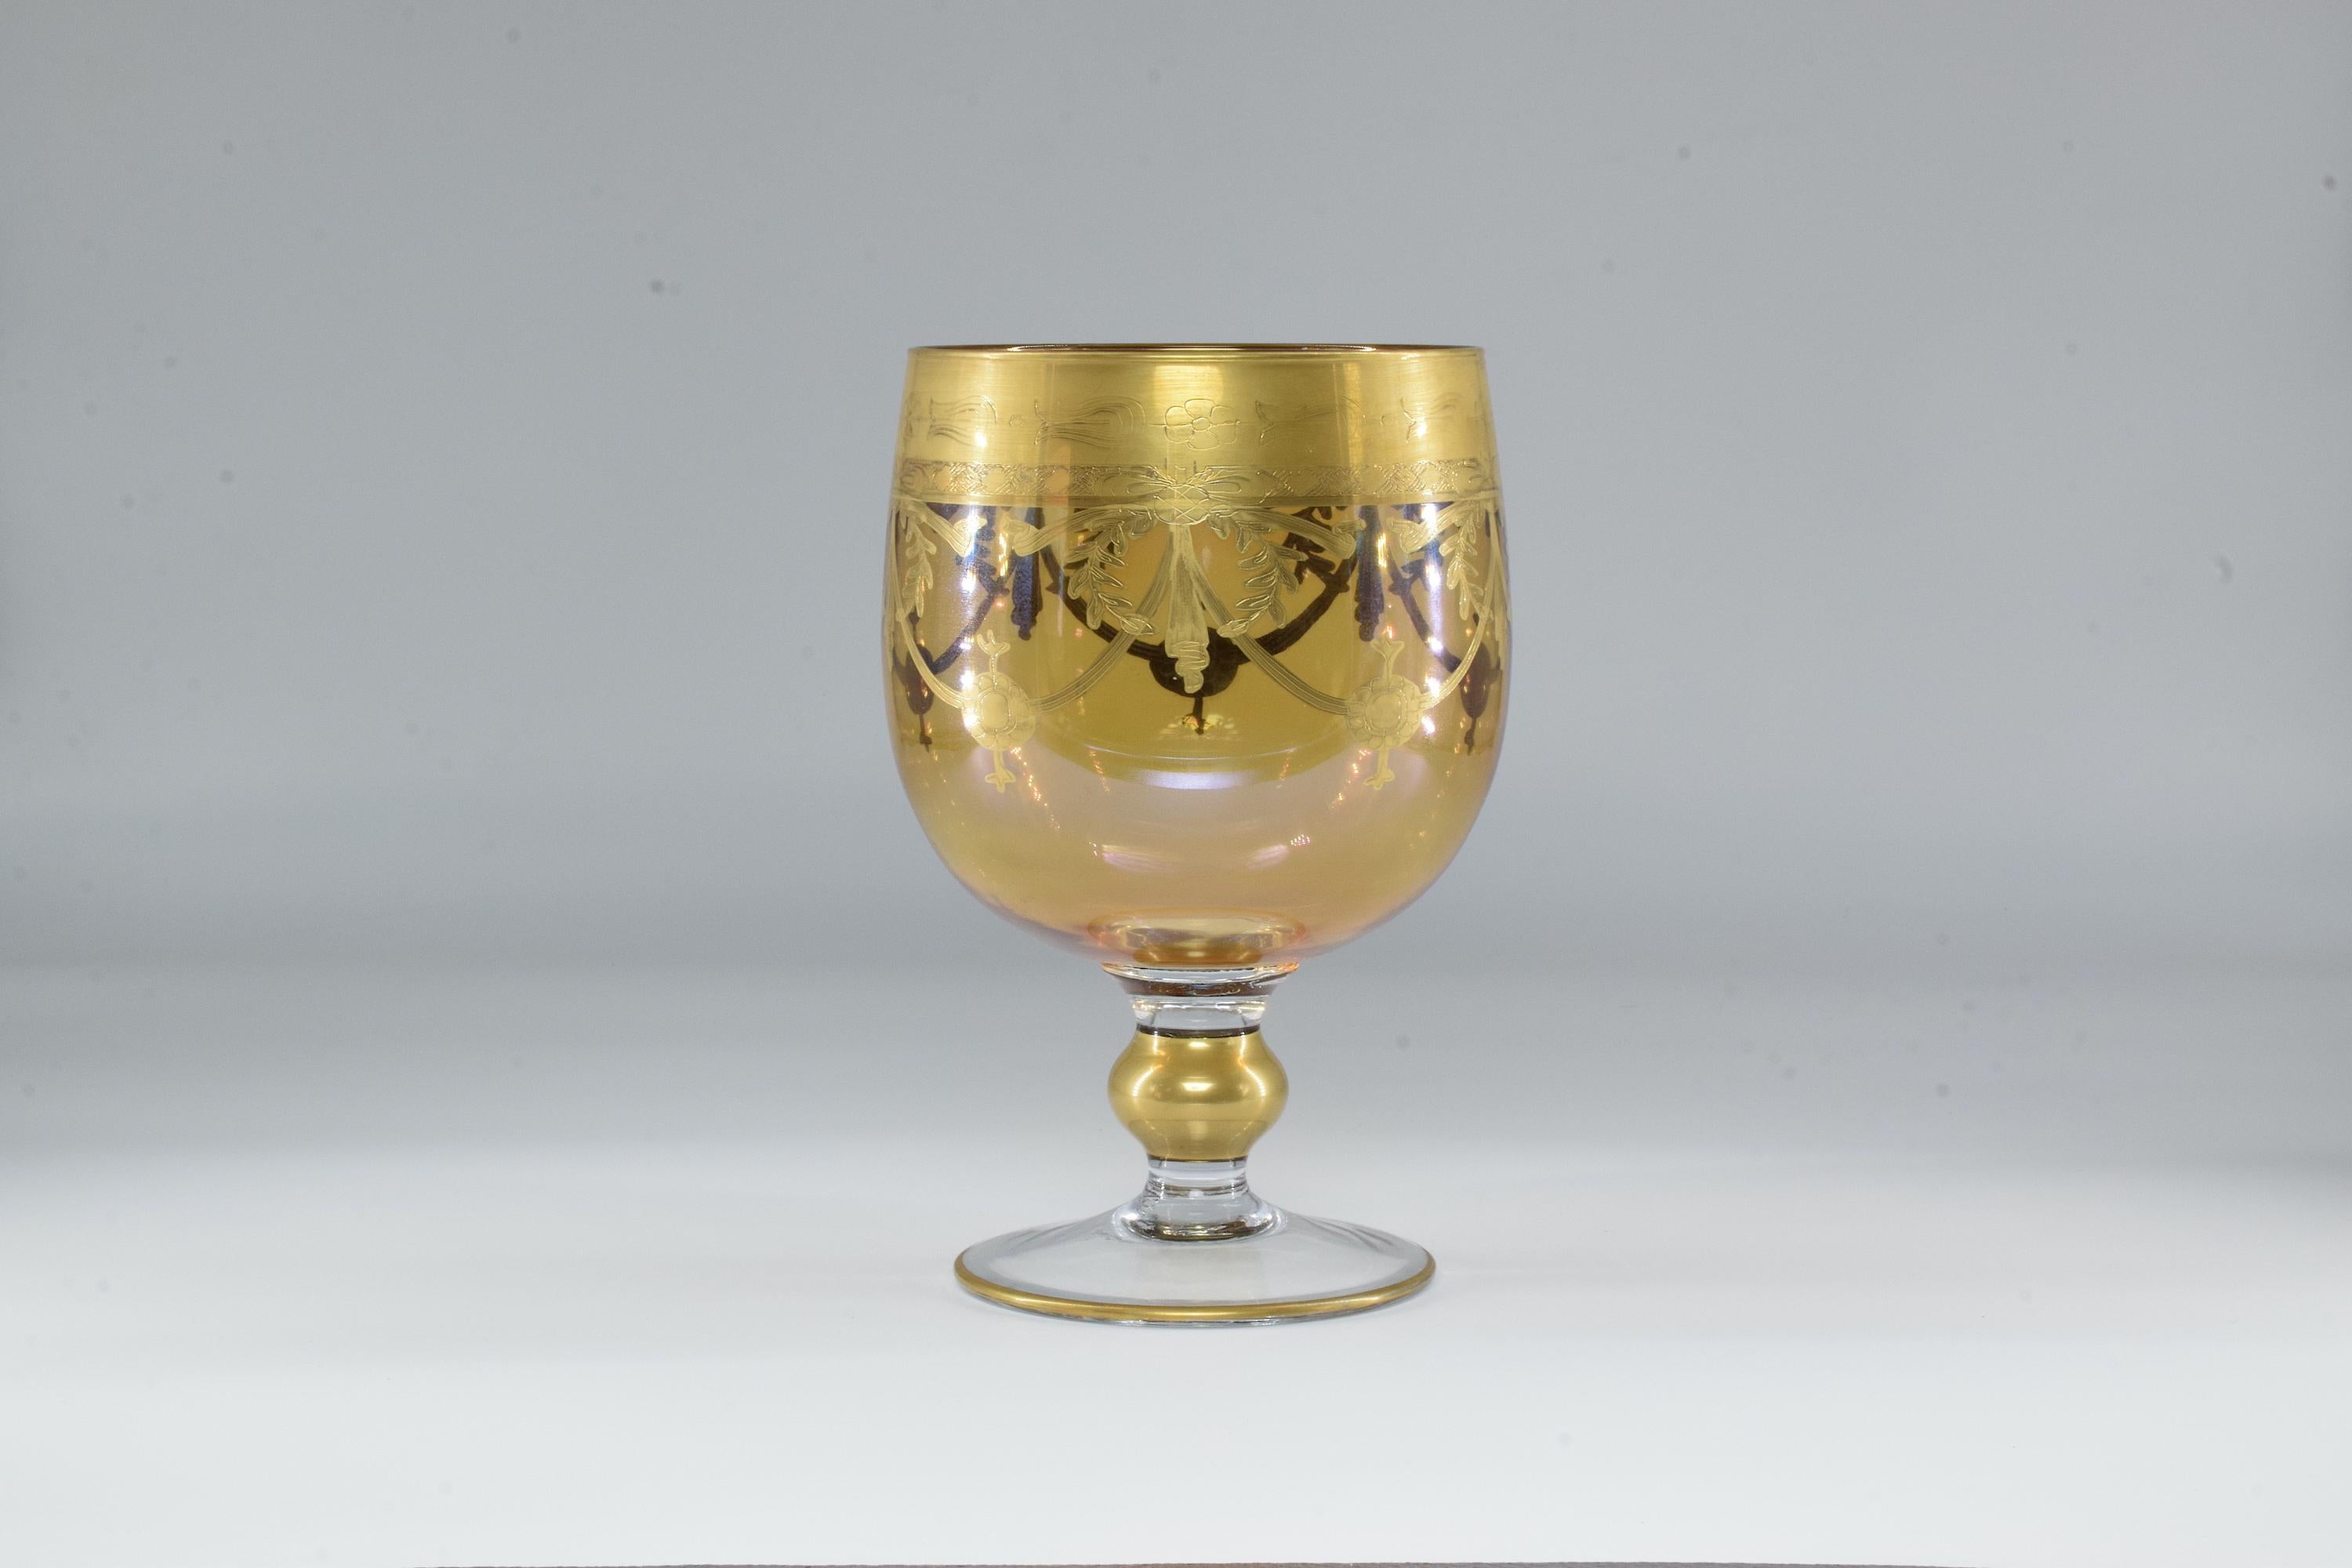 Hollywood Regency 1950s Italian Gold-Plated Decorative Cup For Sale